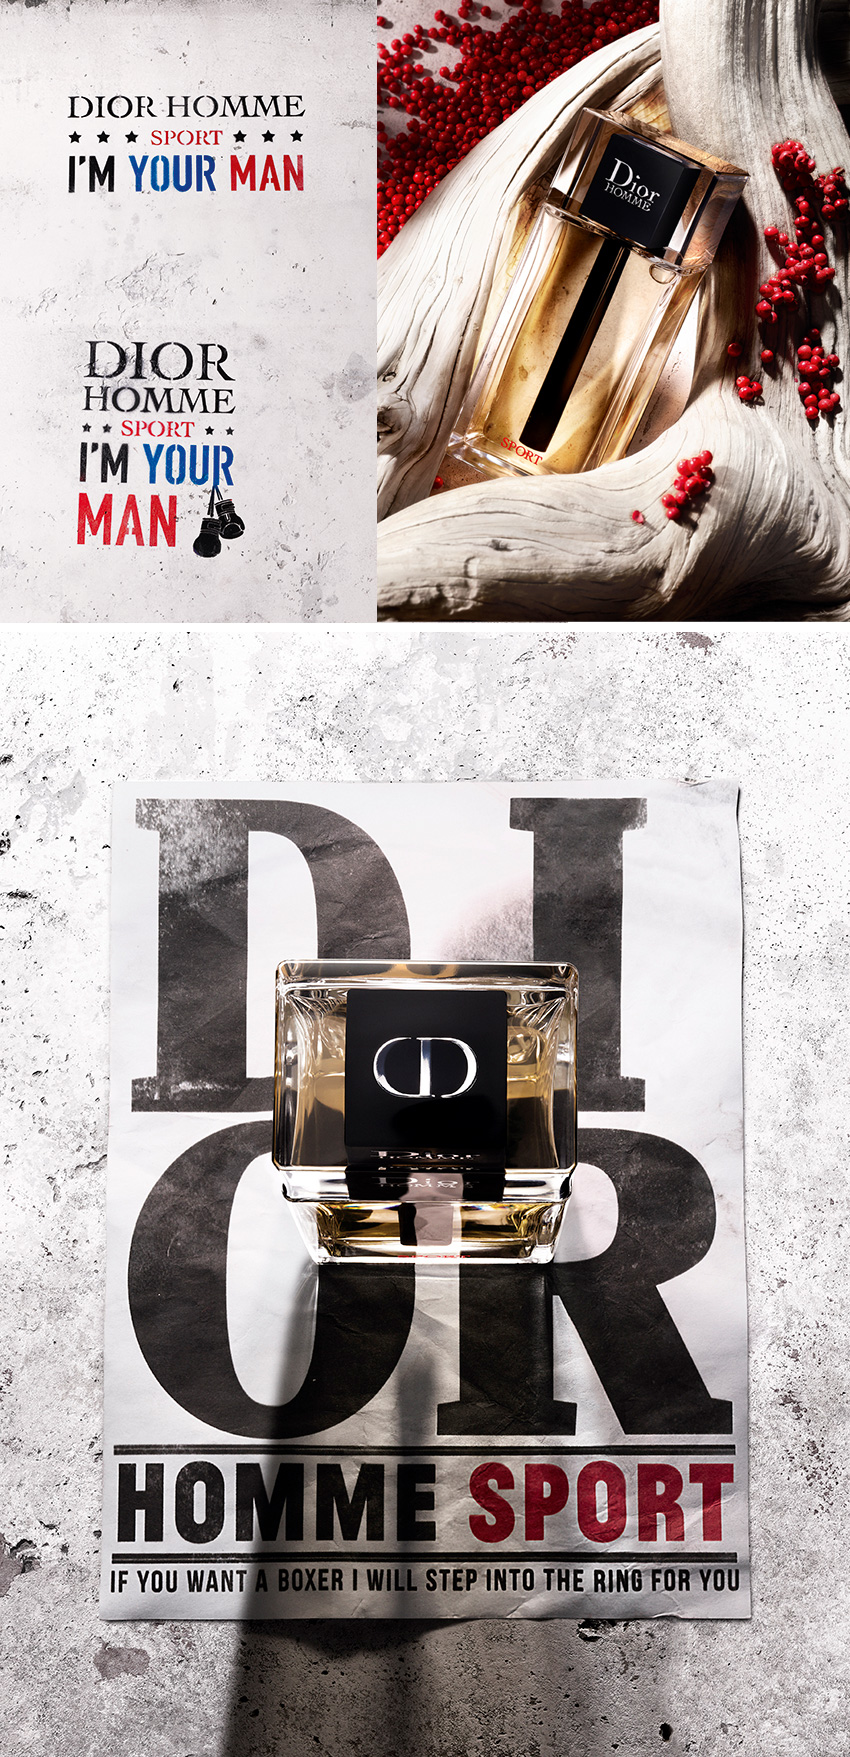 New Dior Homme Sport men fragrance features Frankincense and Amber